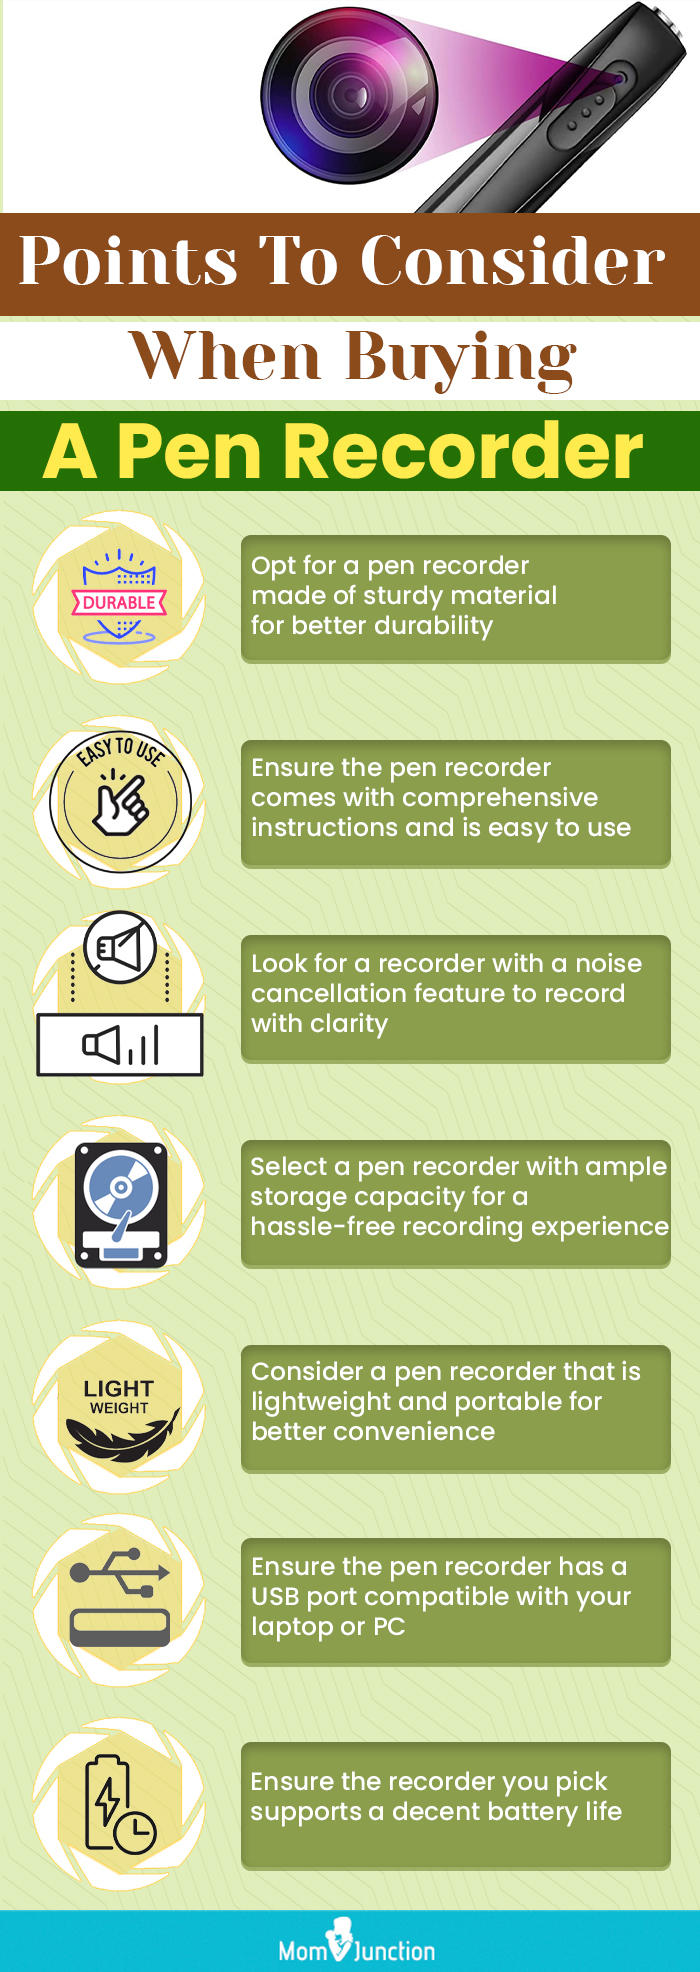 Points To Consider When Buying A Pen Recorder (infographic)